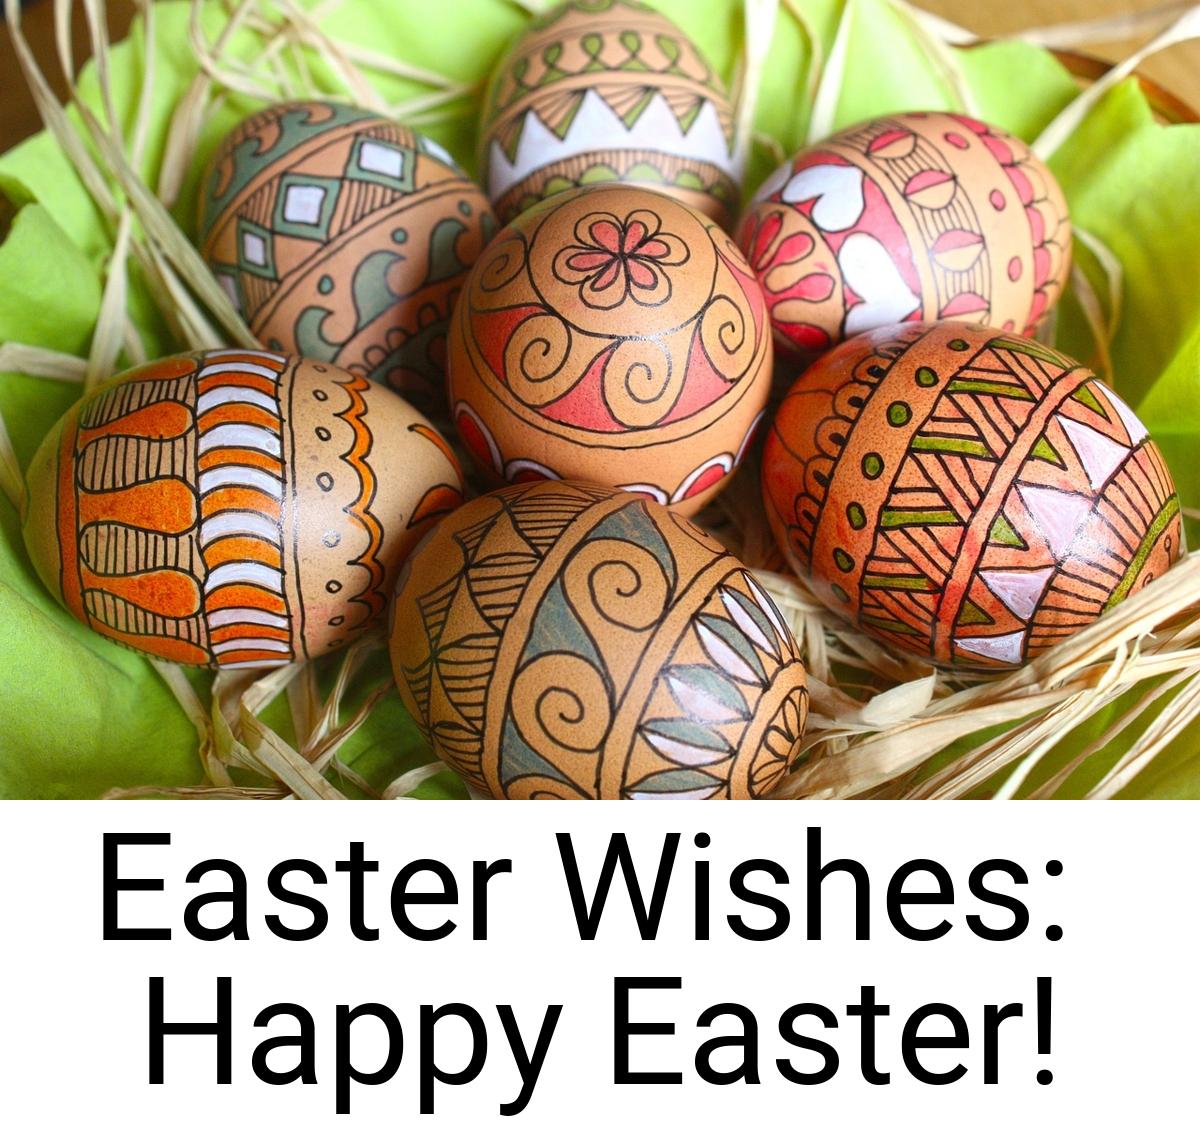 Easter Wishes: Happy Easter